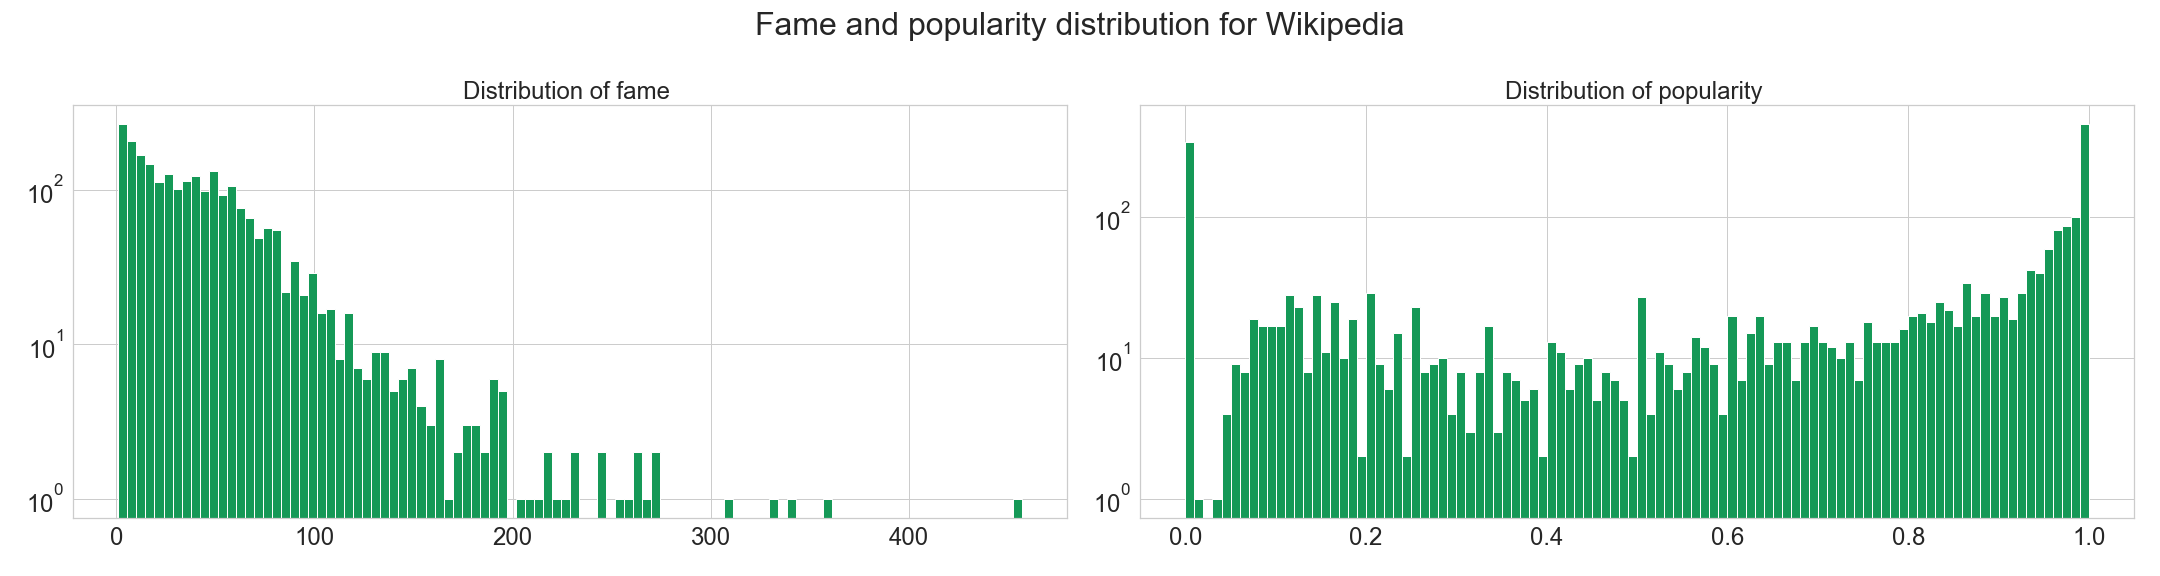 Fame and population distribution for Wikipedia